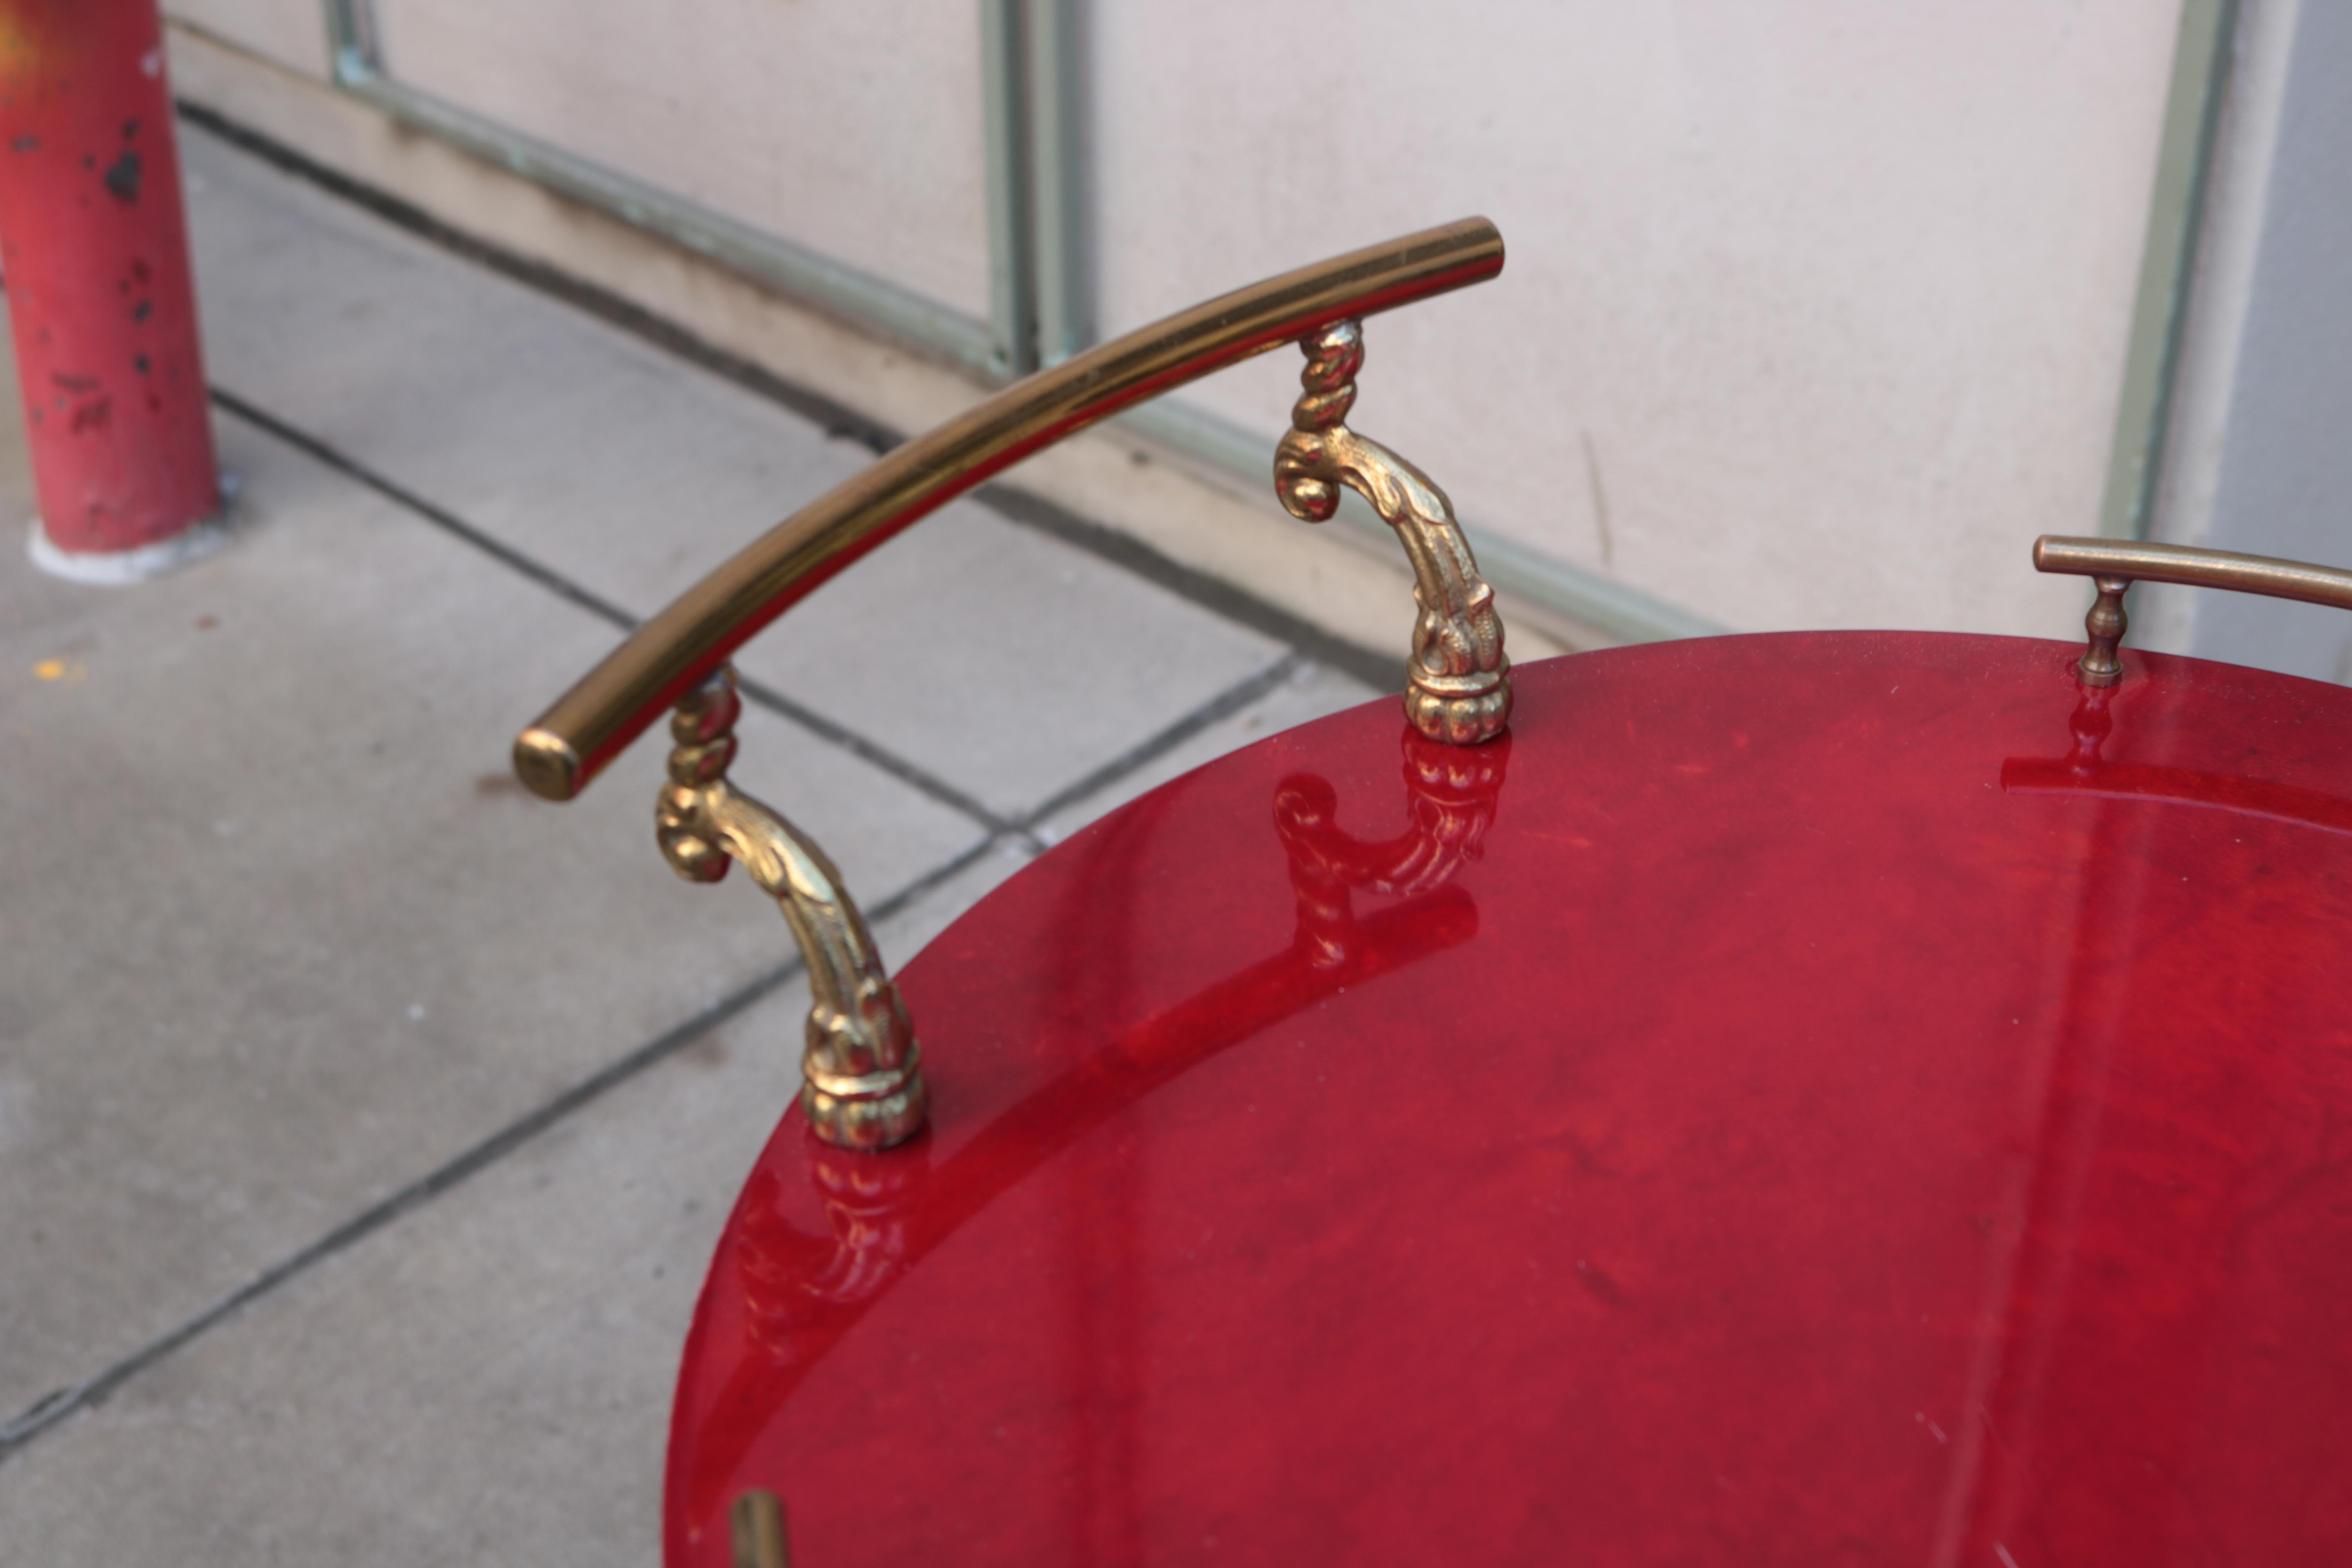 An Aldo Tura Modernist three tier bar cart. 
Patinated brass details and red lacquered parchment.